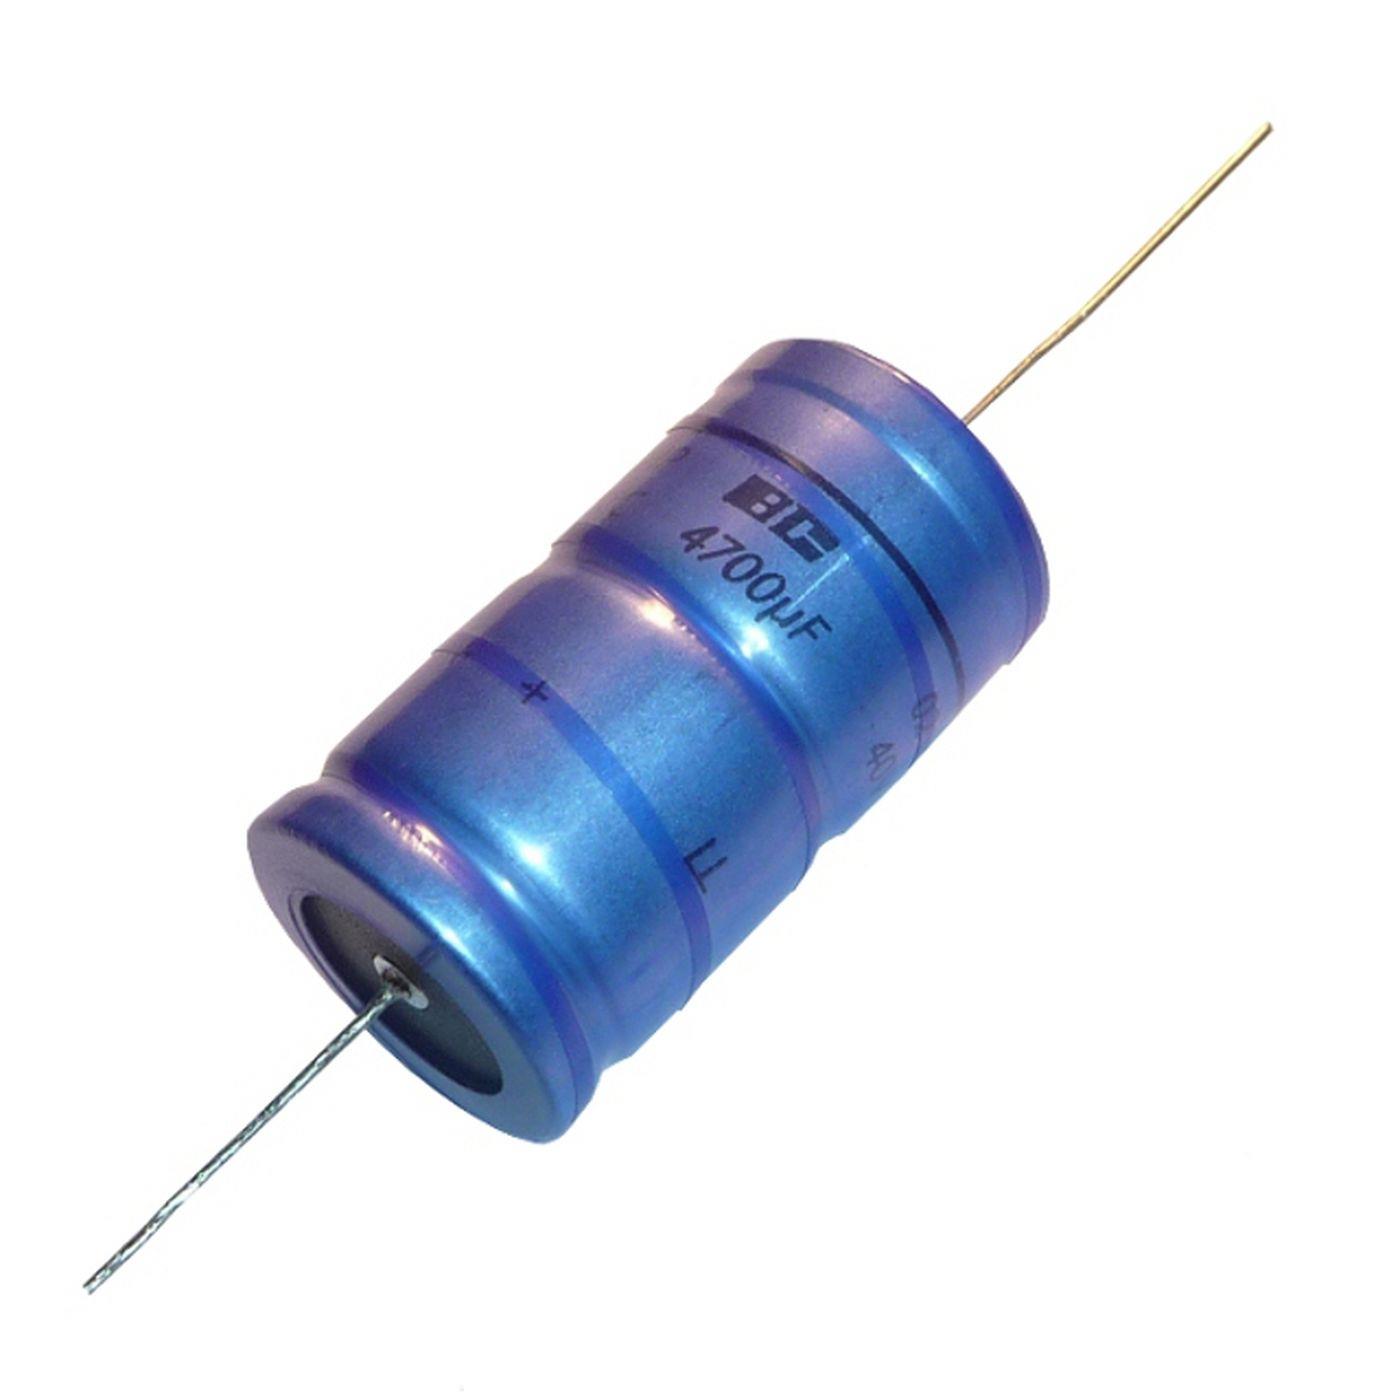 Electrolytic capacitor Axially 2200µF 6,3V 85°C 222202190589 2200uF